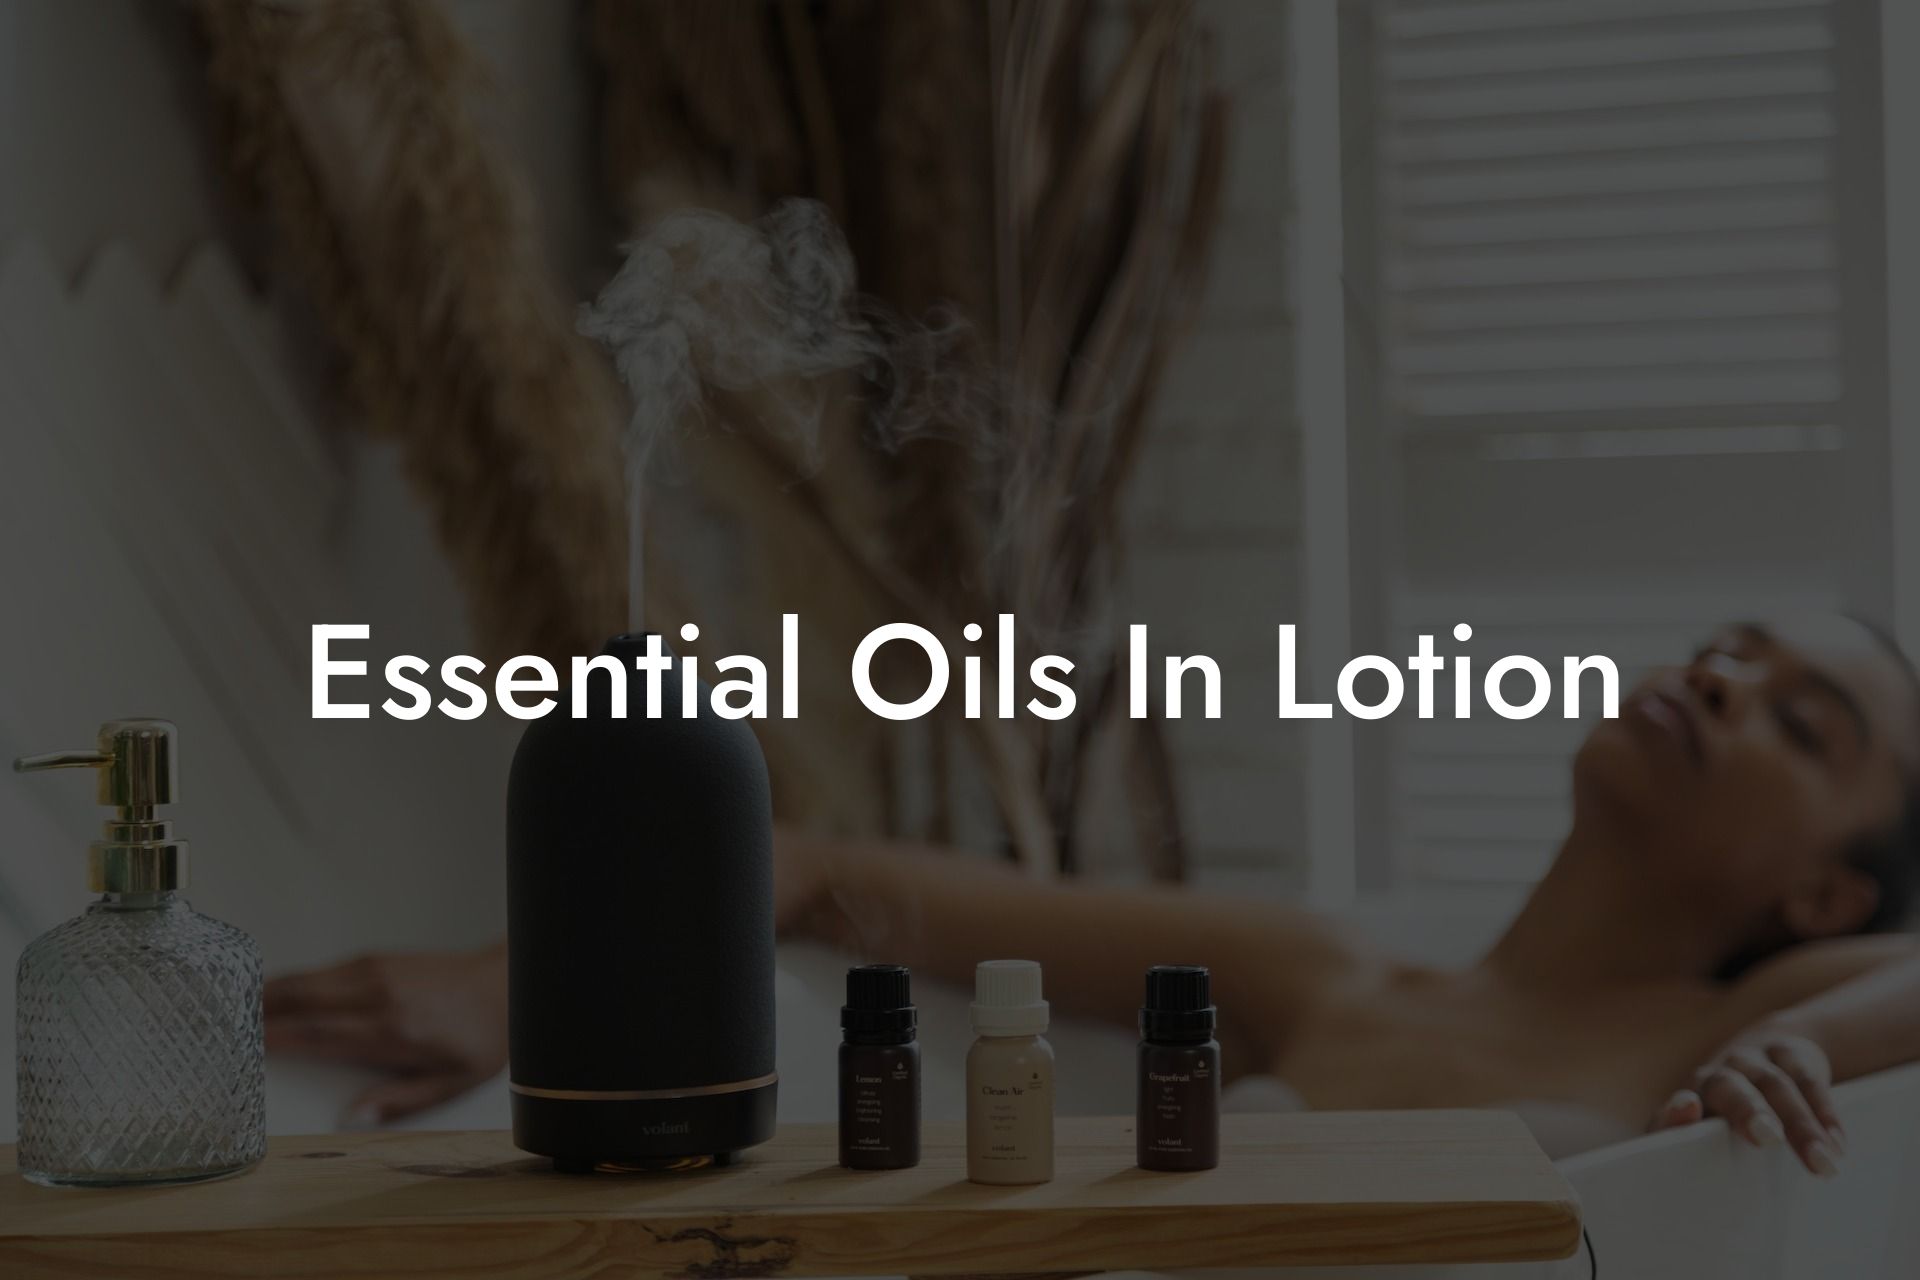 Essential Oils In Lotion